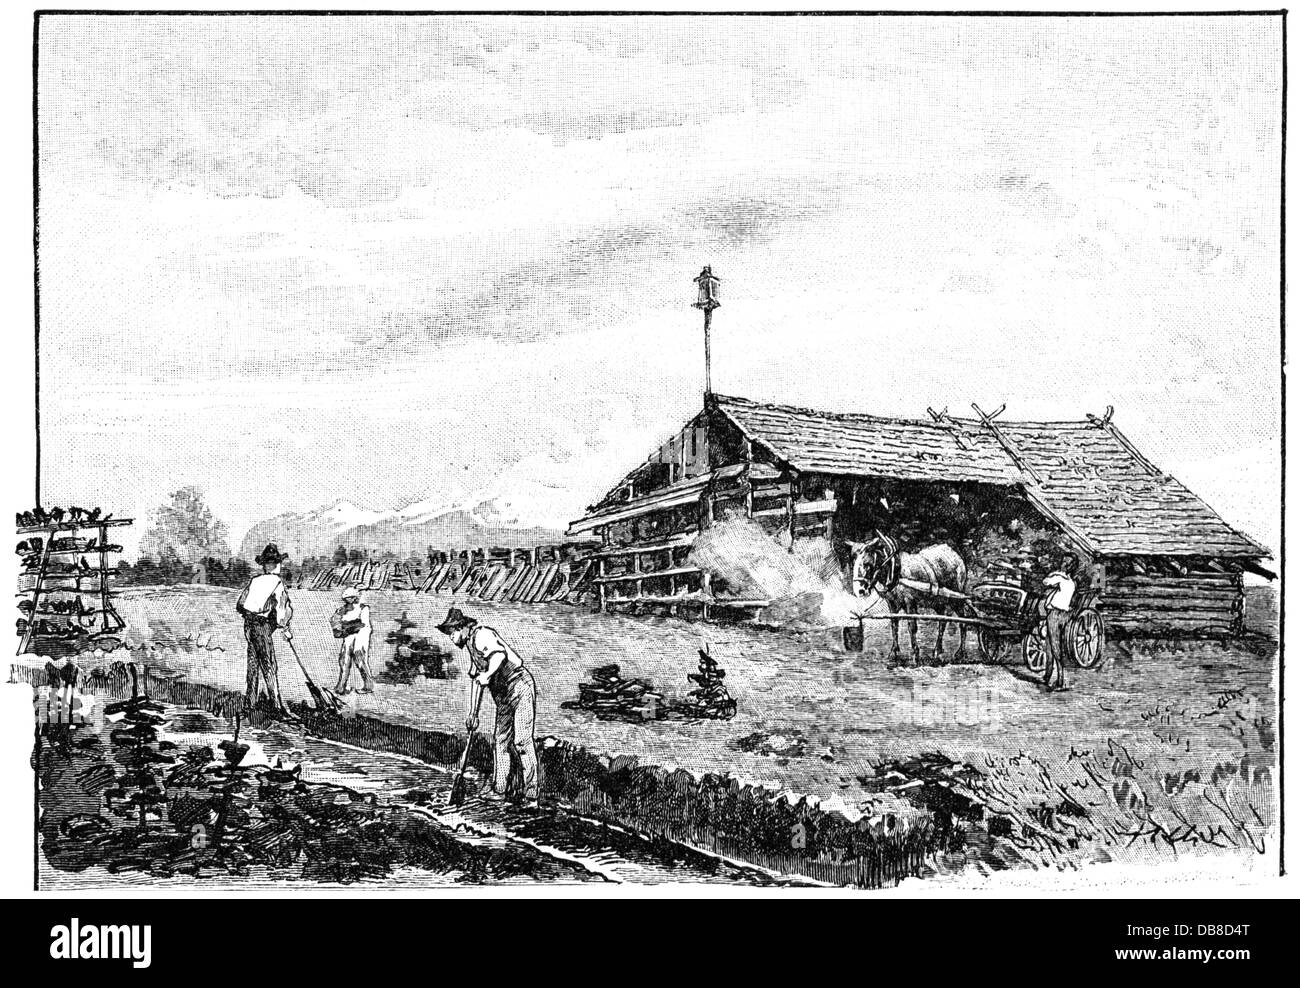 agriculture,farm labour,harvest,peat production in the Rhine Valley,wood engraving,19th century,19th century,graphic,graphics,moor,moors,marsh,marshes,stone turf,lard peat,crumble peat,vag,tallow peat,dredged peat,peat breccia,peat slime,muck,amorphous peat,conferva peat,drift peat,chaff peat,brushwood peat,cut peat,peat cutting,peat digging,agricultural labourer,peasant labourer,agricultural labourers,peasant labourers,farmhand,worker,workers,working,building,buildings,house,houses,horse,horses,horse-drawn vehicle,h,Additional-Rights-Clearences-Not Available Stock Photo